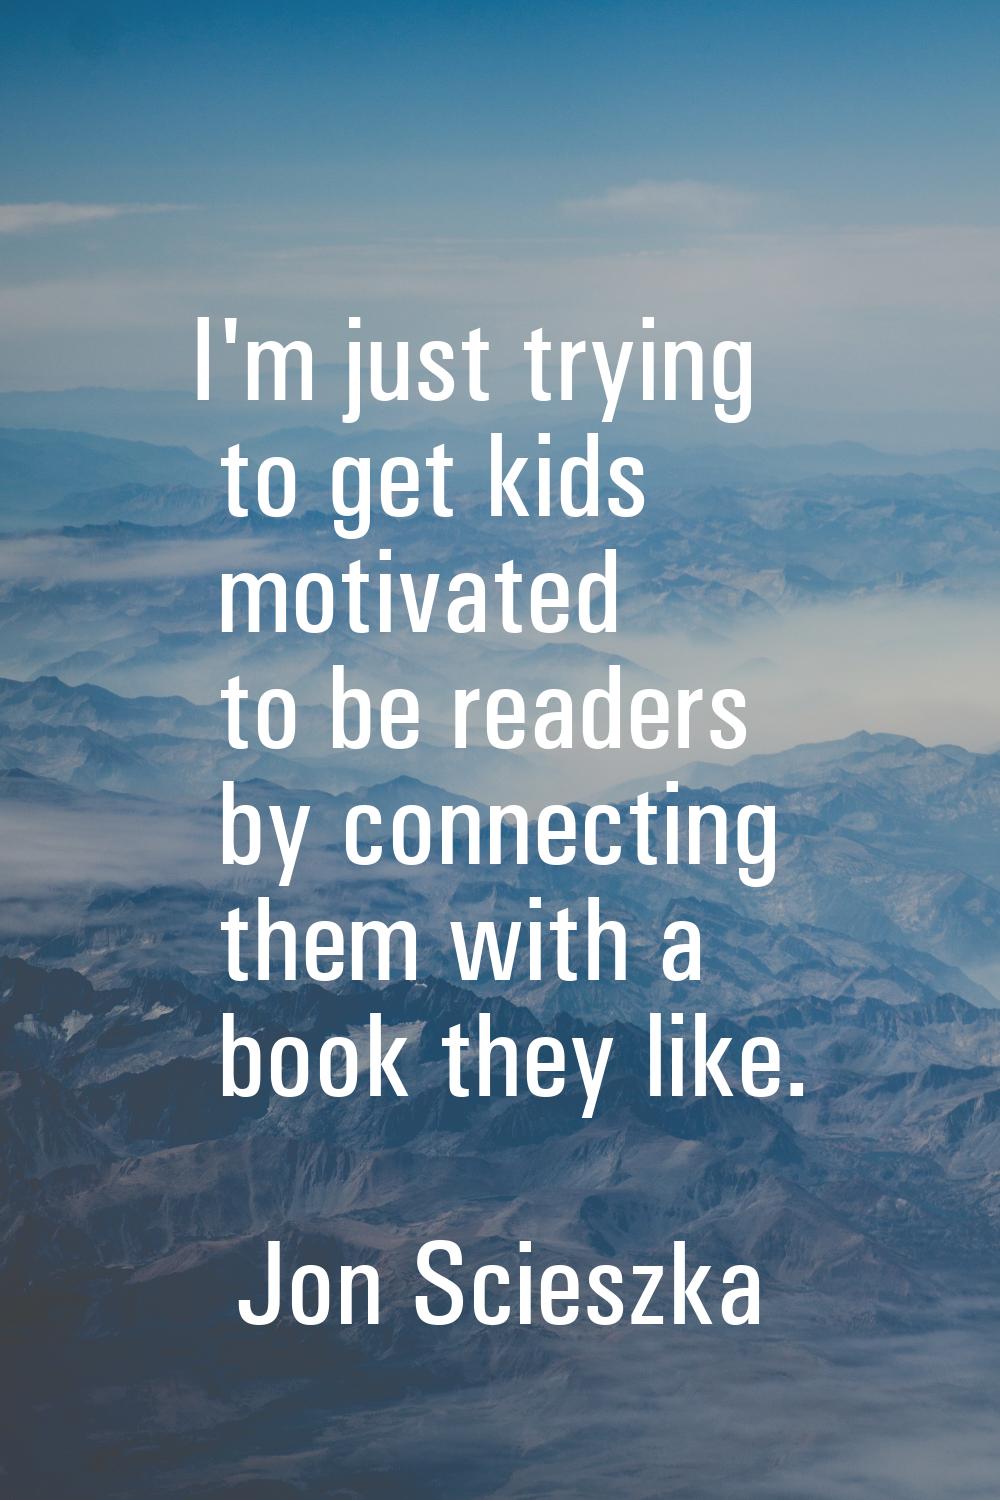 I'm just trying to get kids motivated to be readers by connecting them with a book they like.